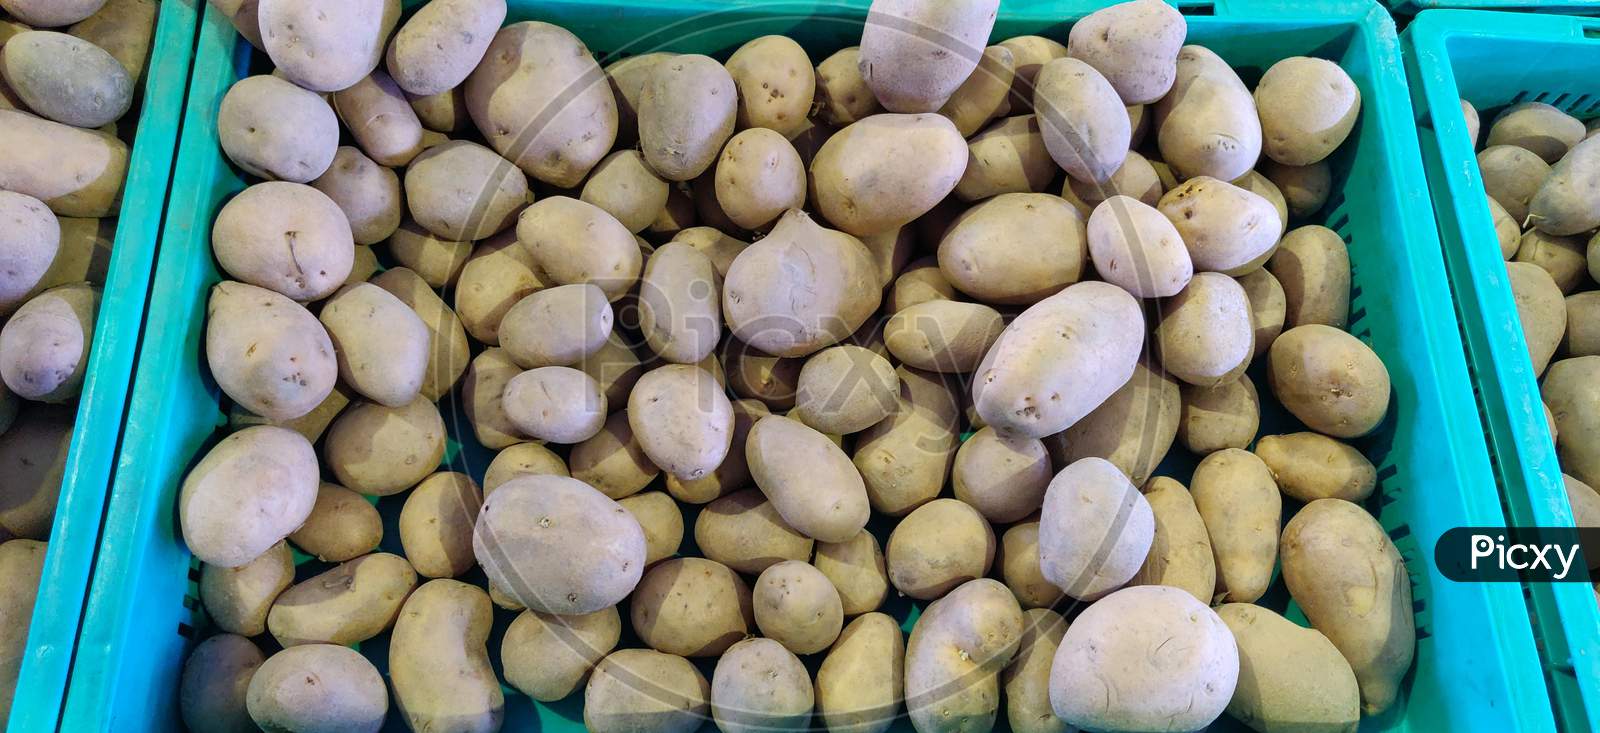 Fresh Potatoes are ready to sell